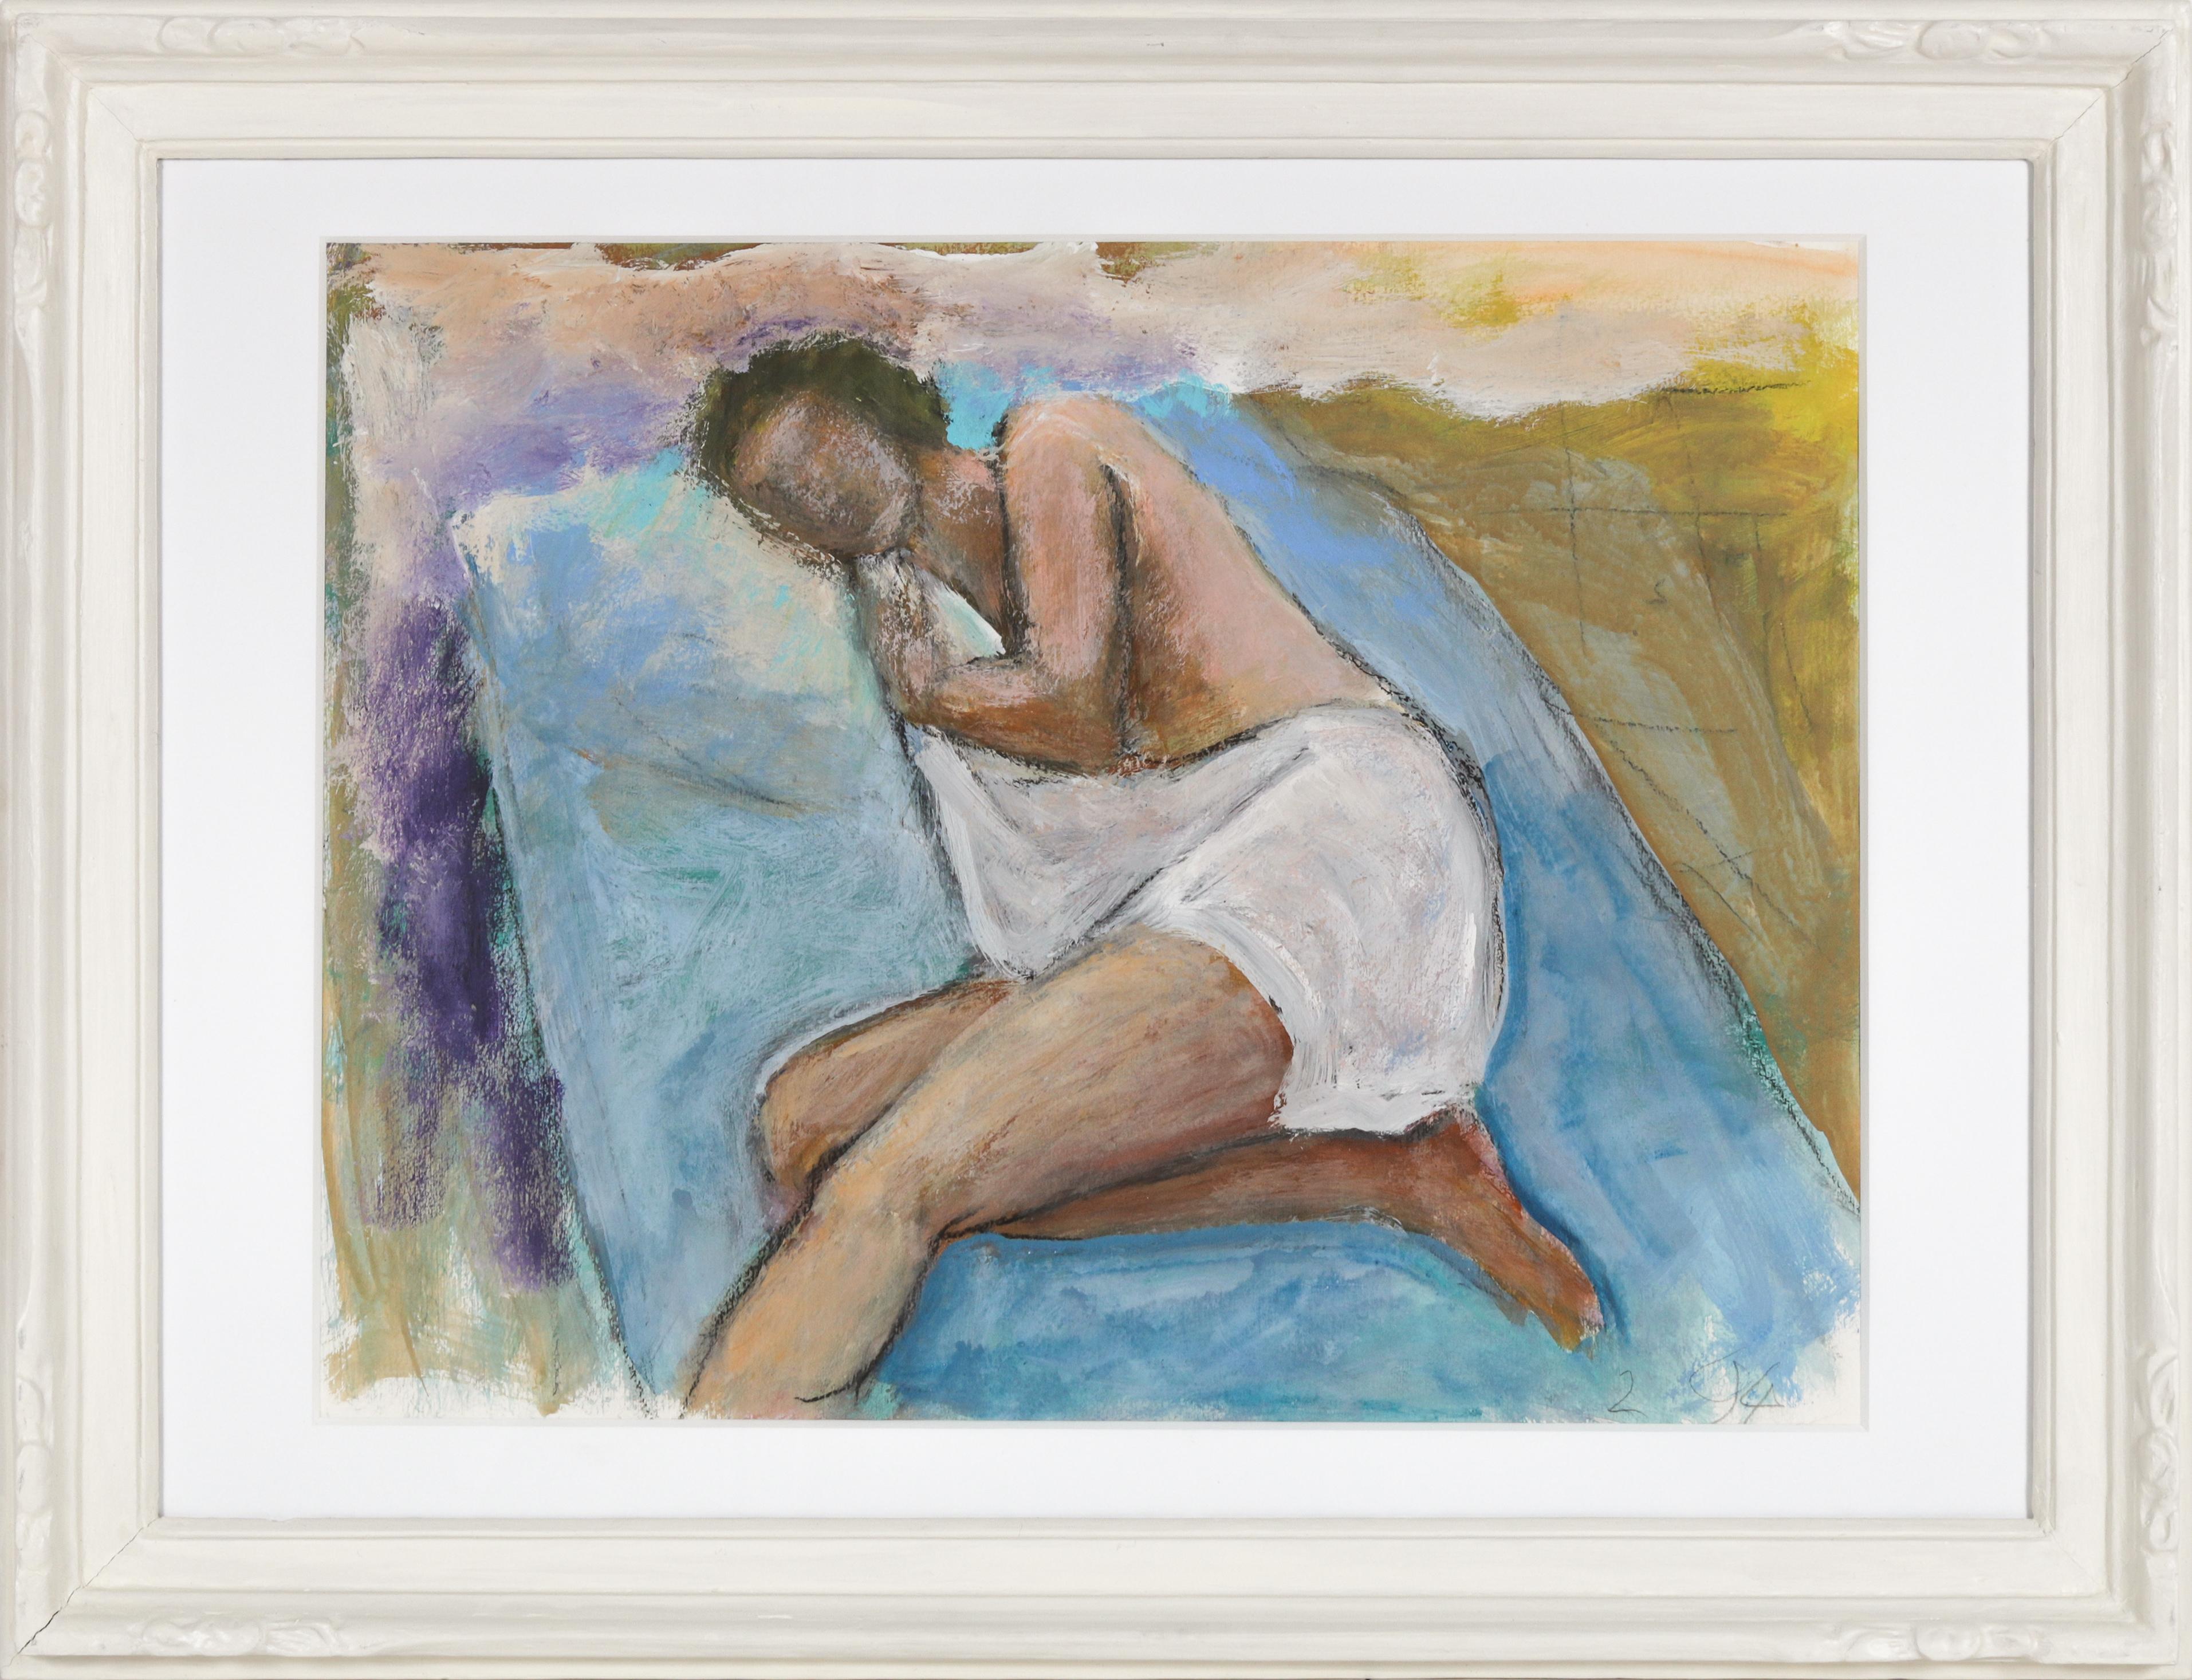 Unknown Figurative Painting - Abstracted Lounging Figure 1994 Mixed Media